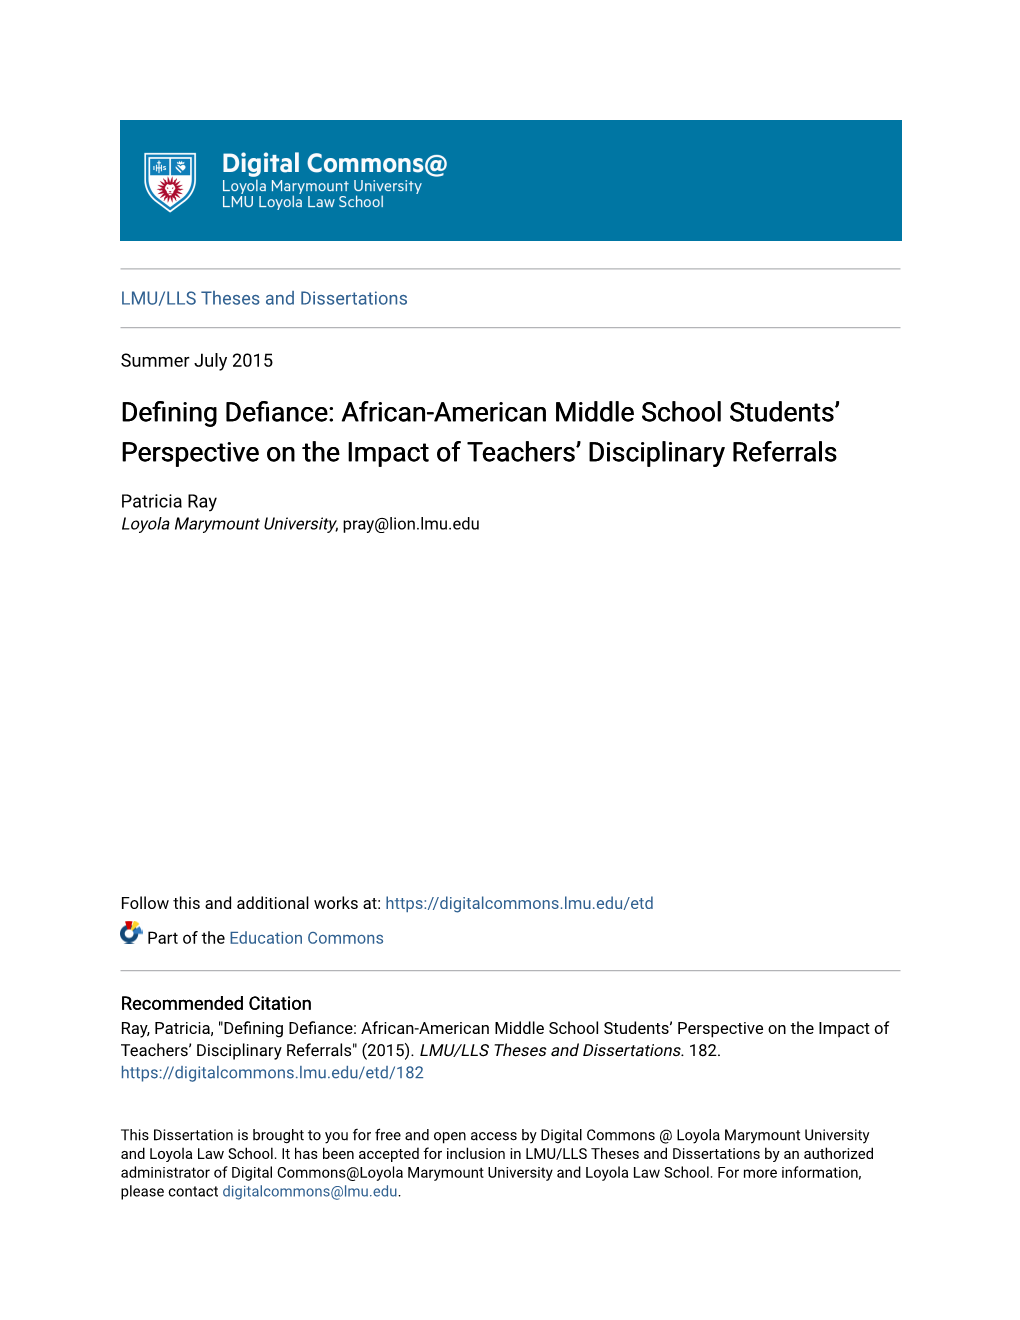 African-American Middle School Students' Perspective on the Impact